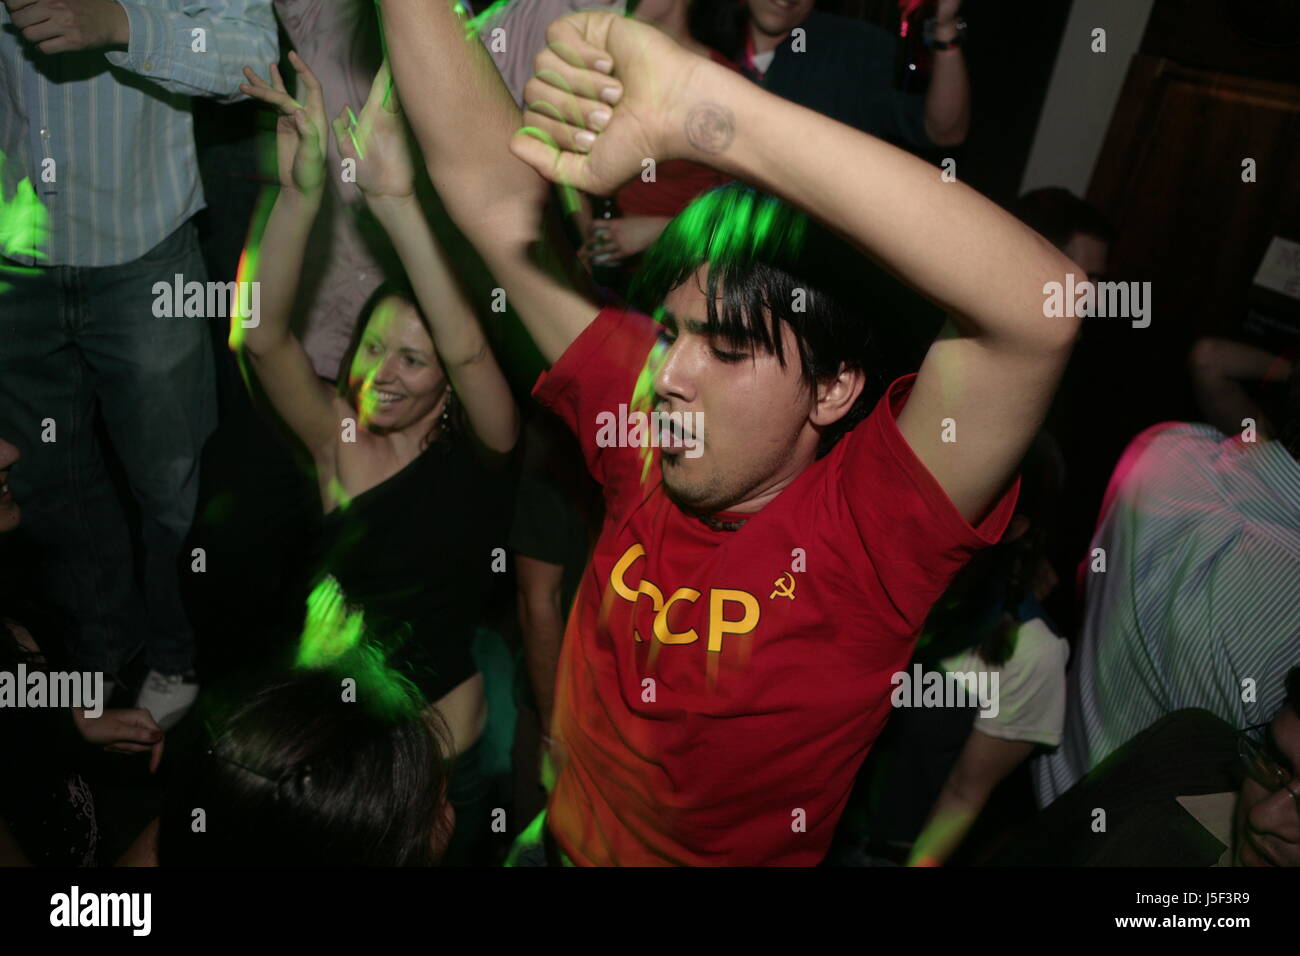 Russian College Party